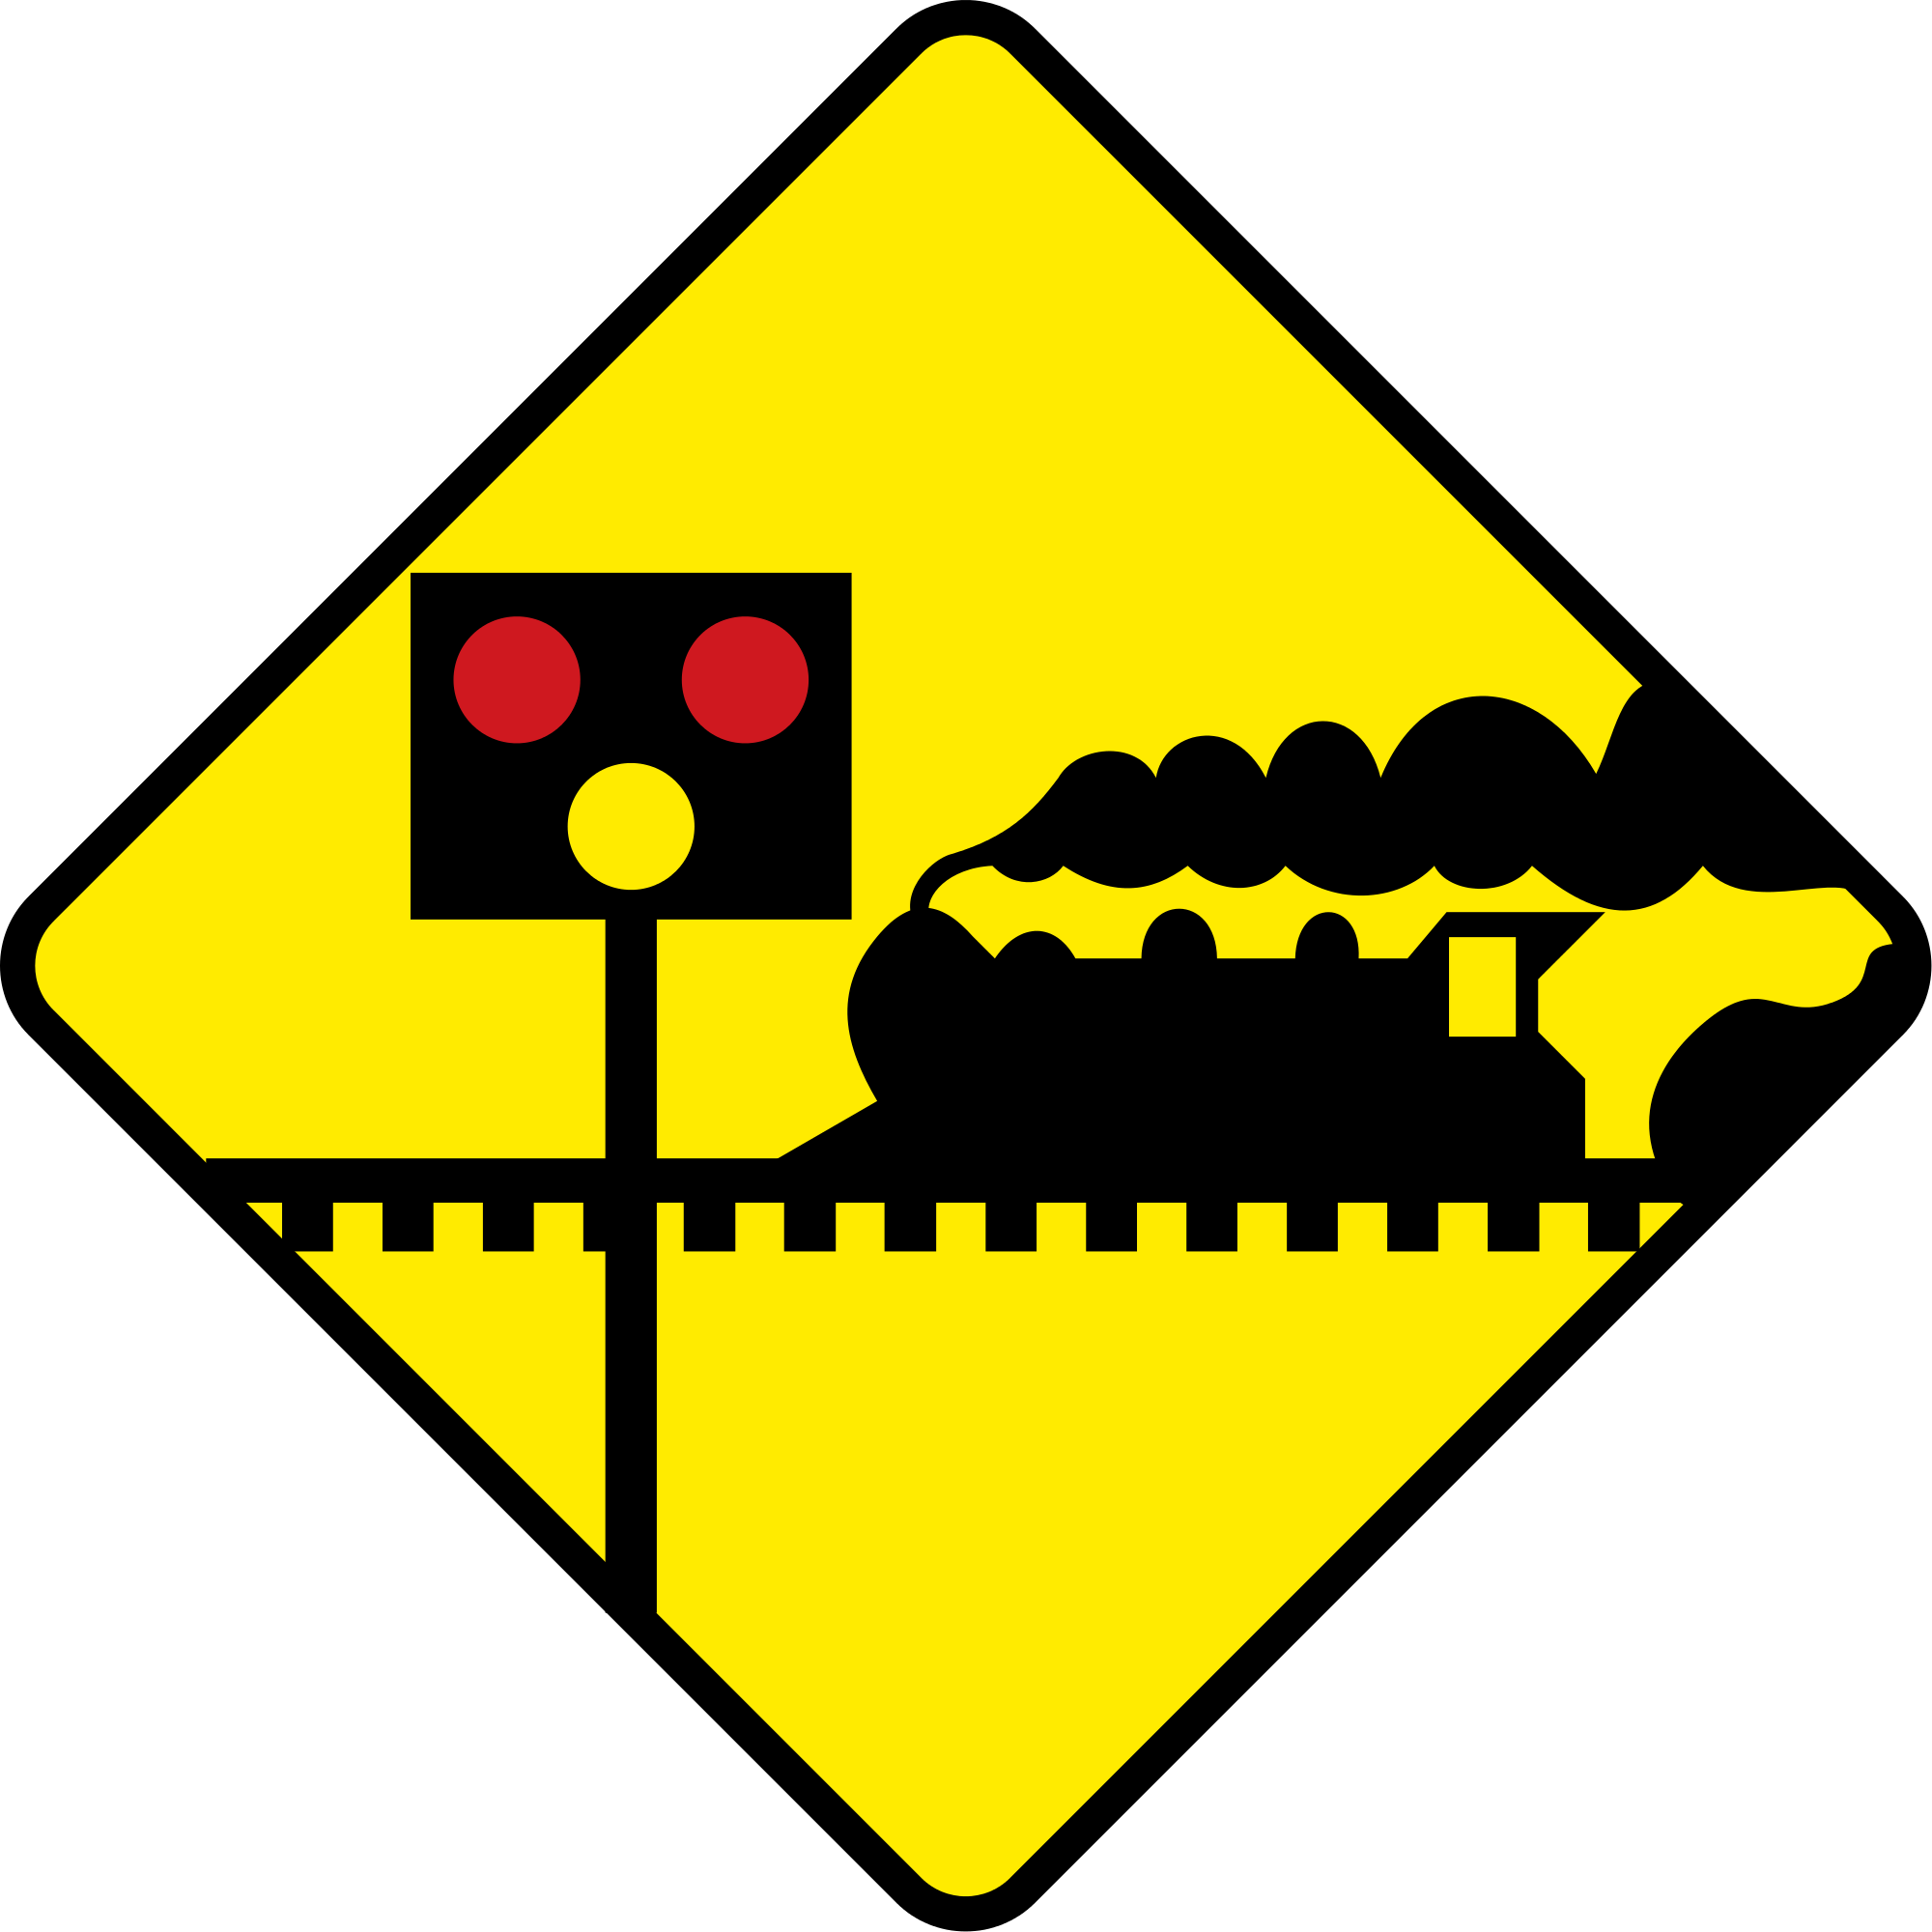 A Yellow Sign With A Train On It